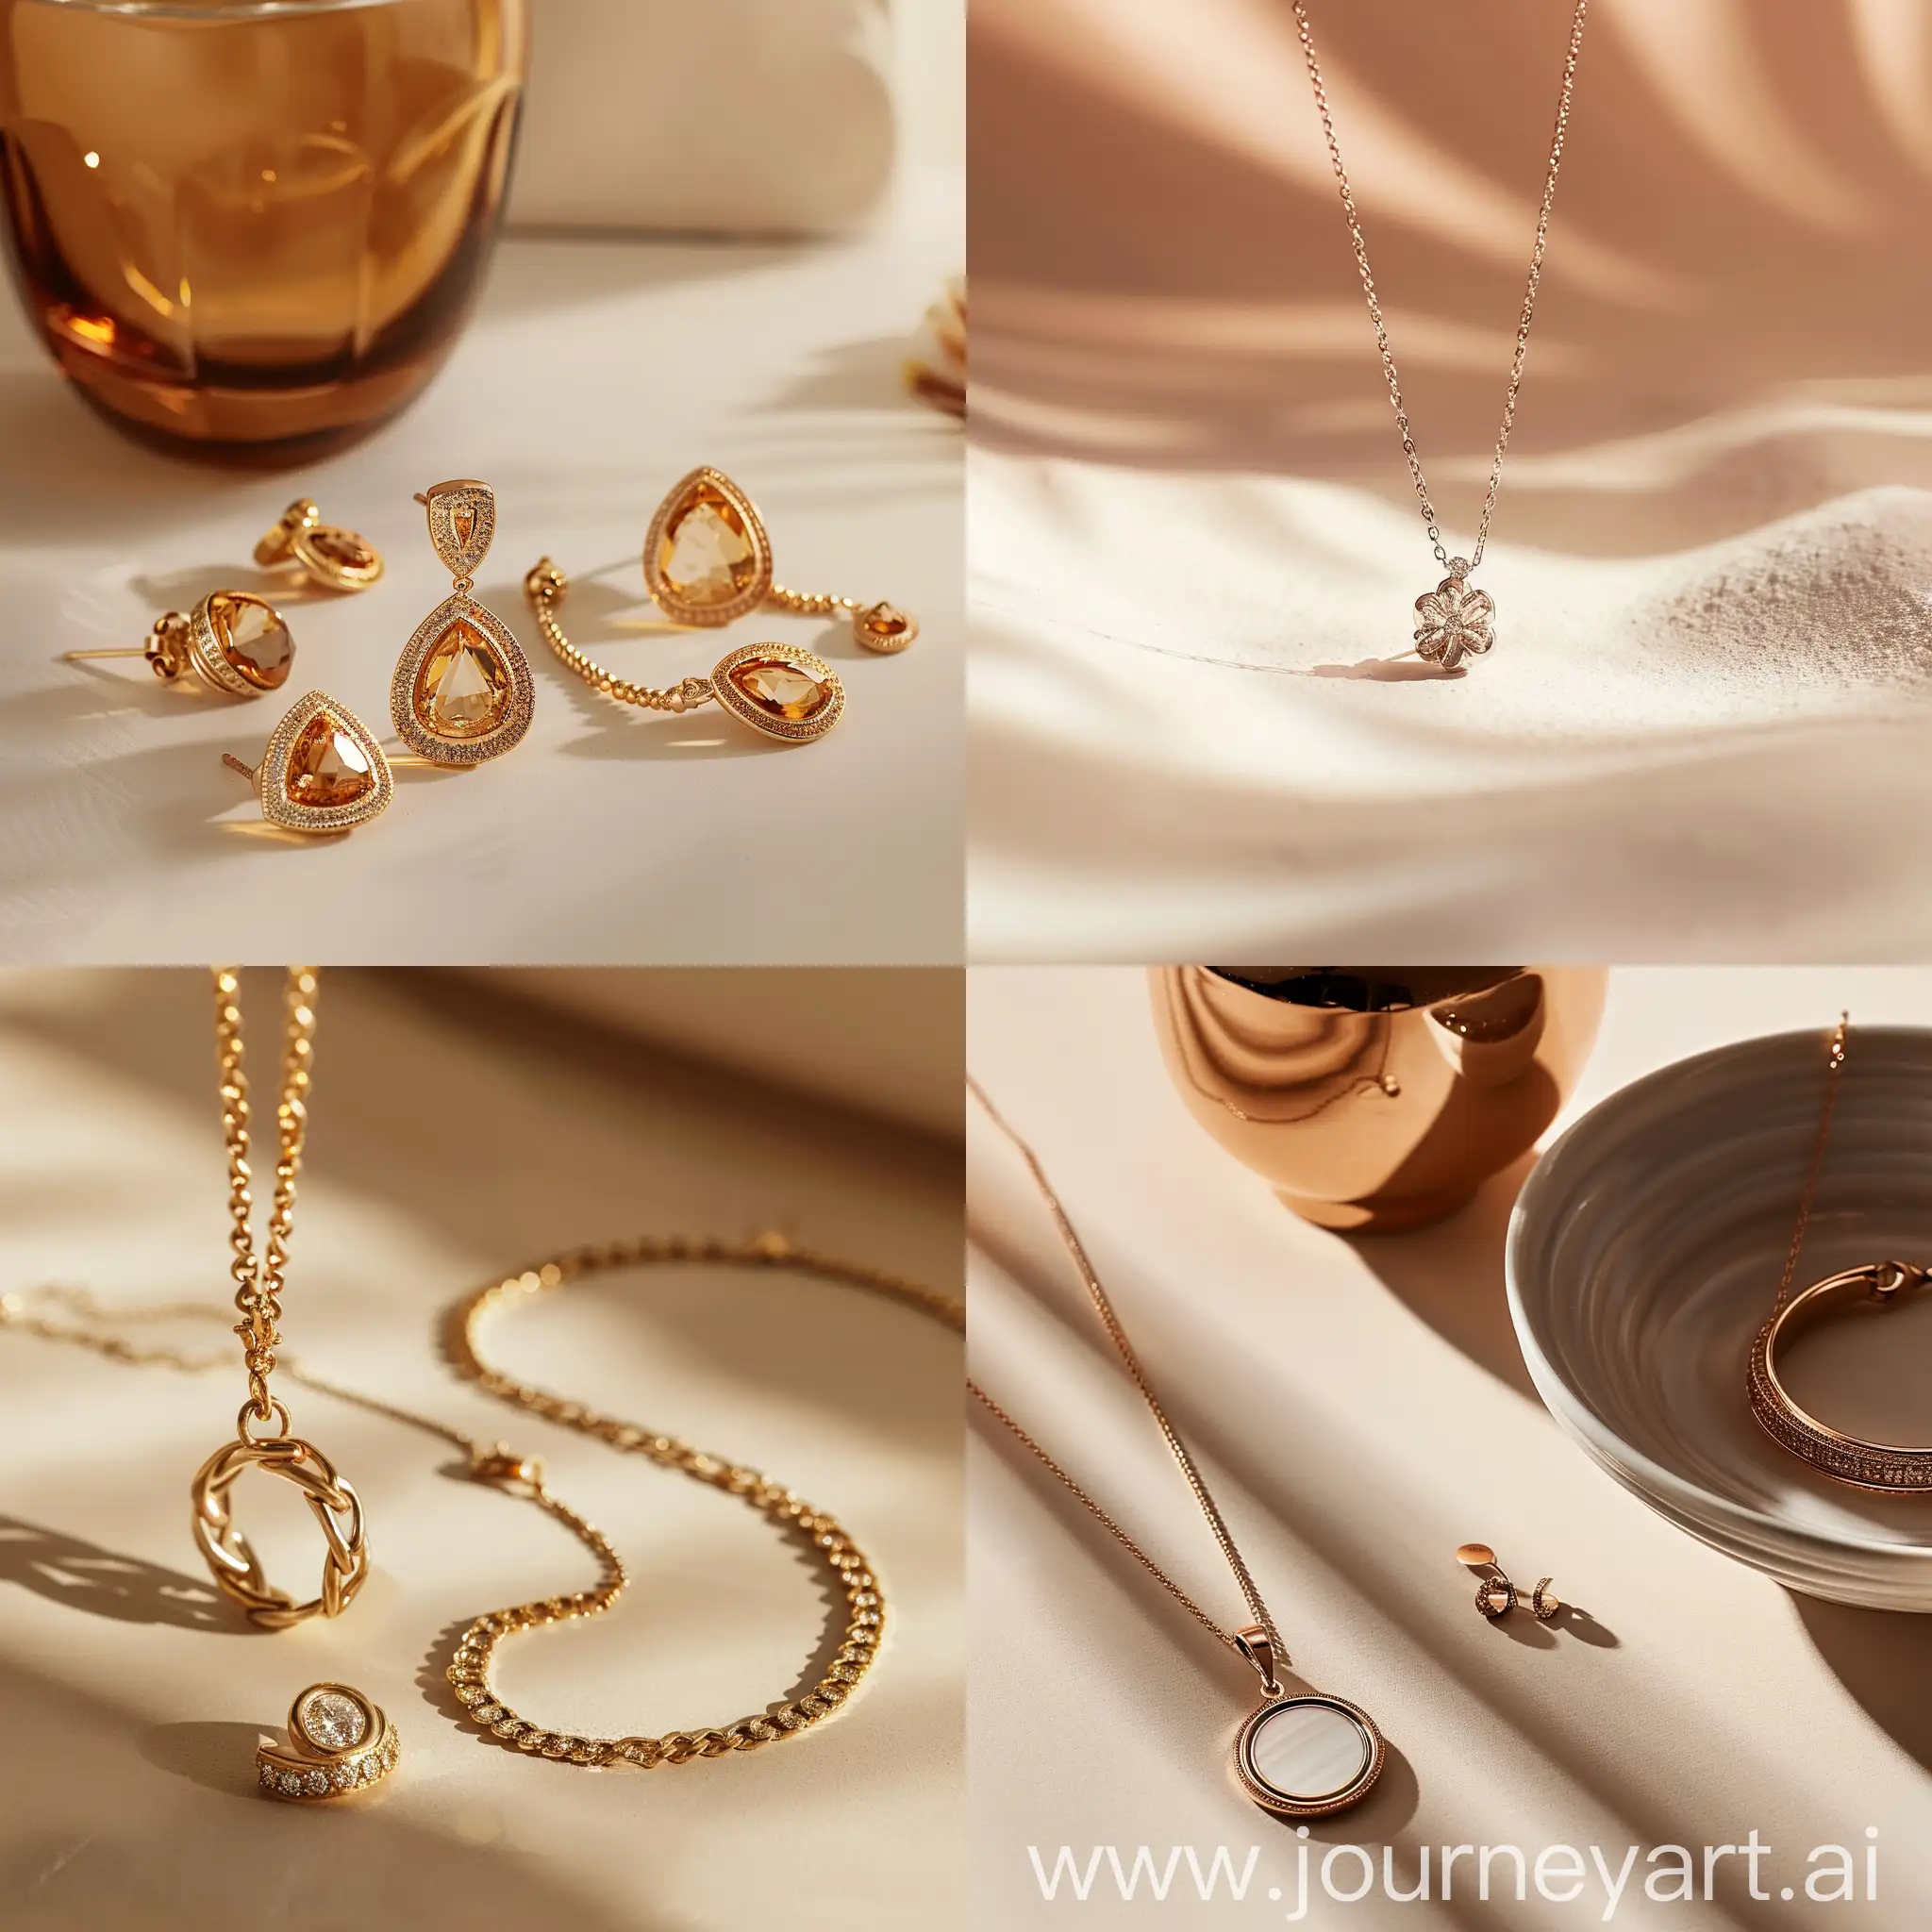 Elegant-Jewelry-Products-on-Clean-Beige-Background-CloseUp-Product-Photography